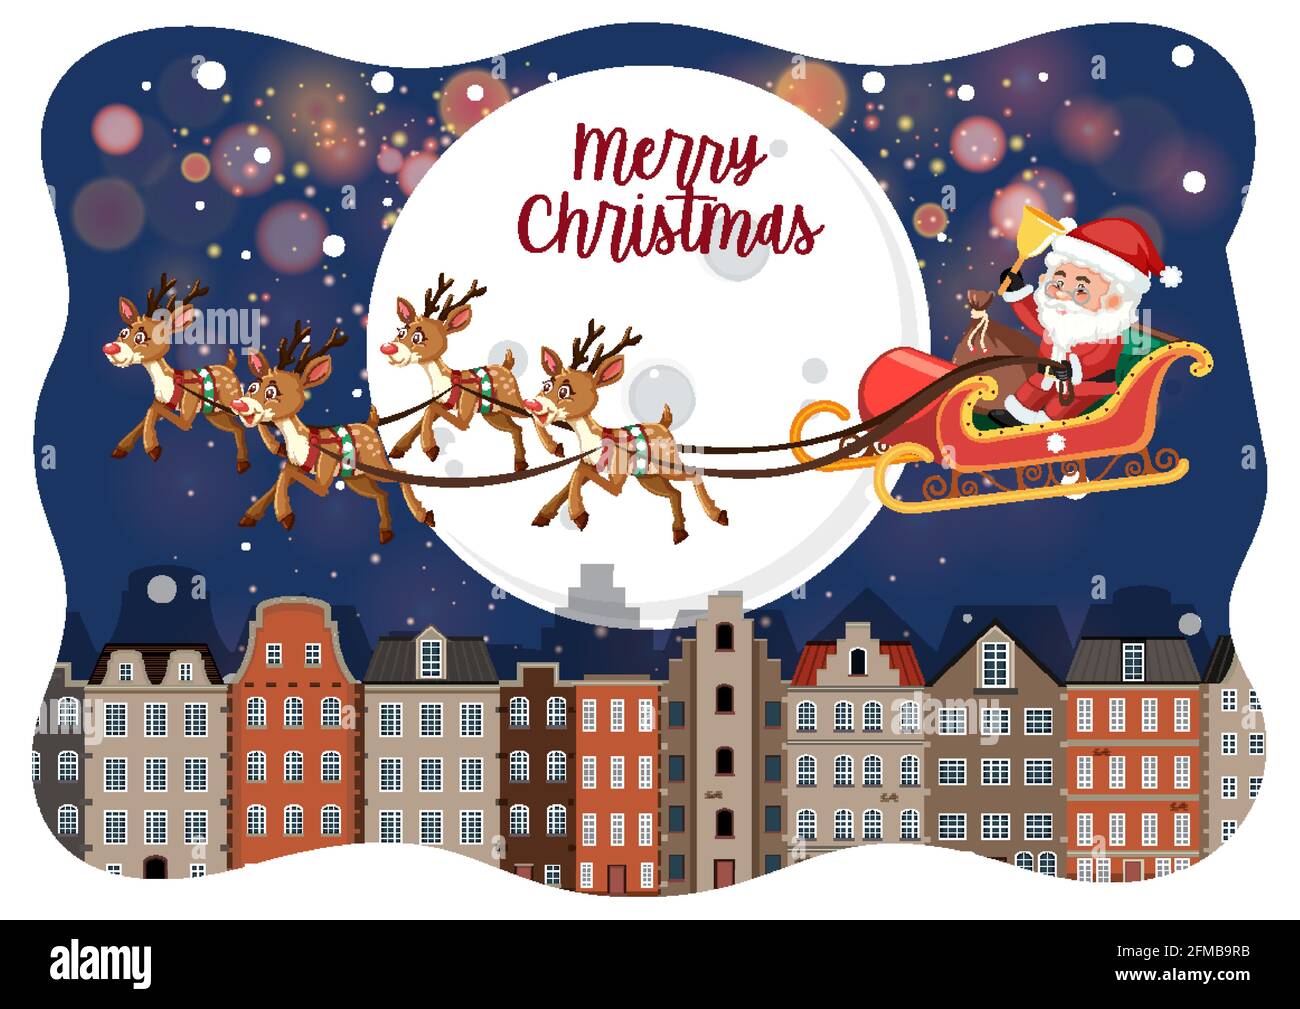 Merry Christmas font with Santa Claus on a sleigh in snow scene illustration Stock Vector